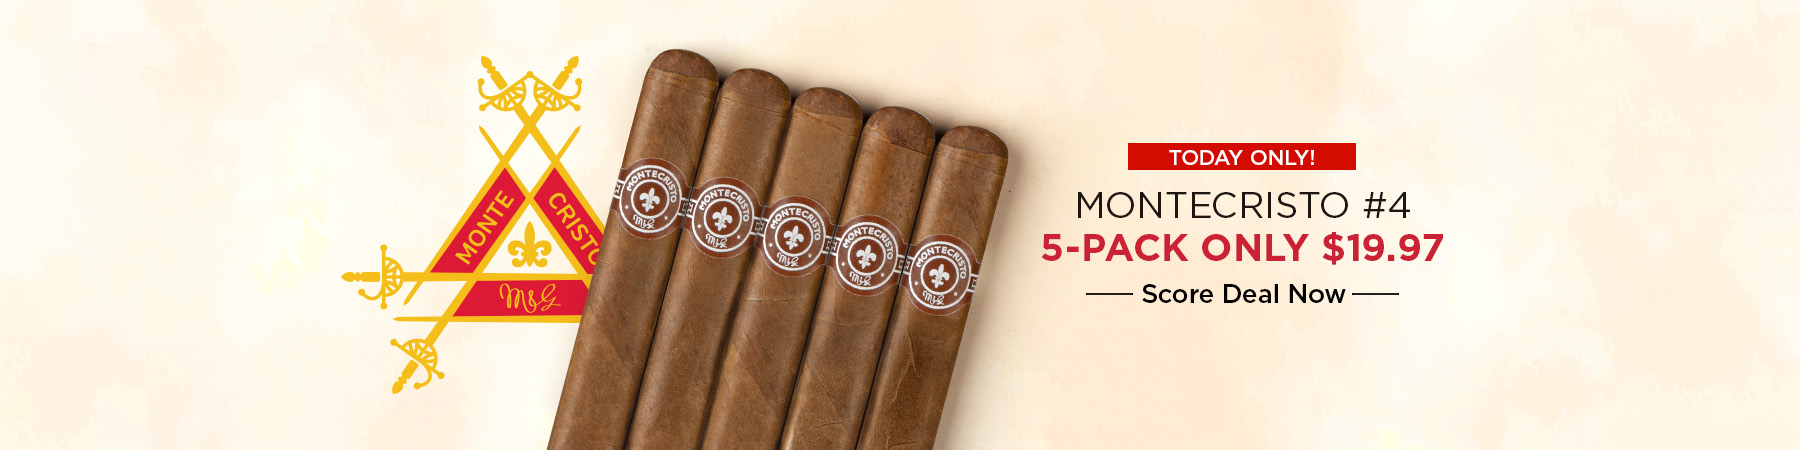 Today only, Montecristo #4 5-Pack just $19.97!